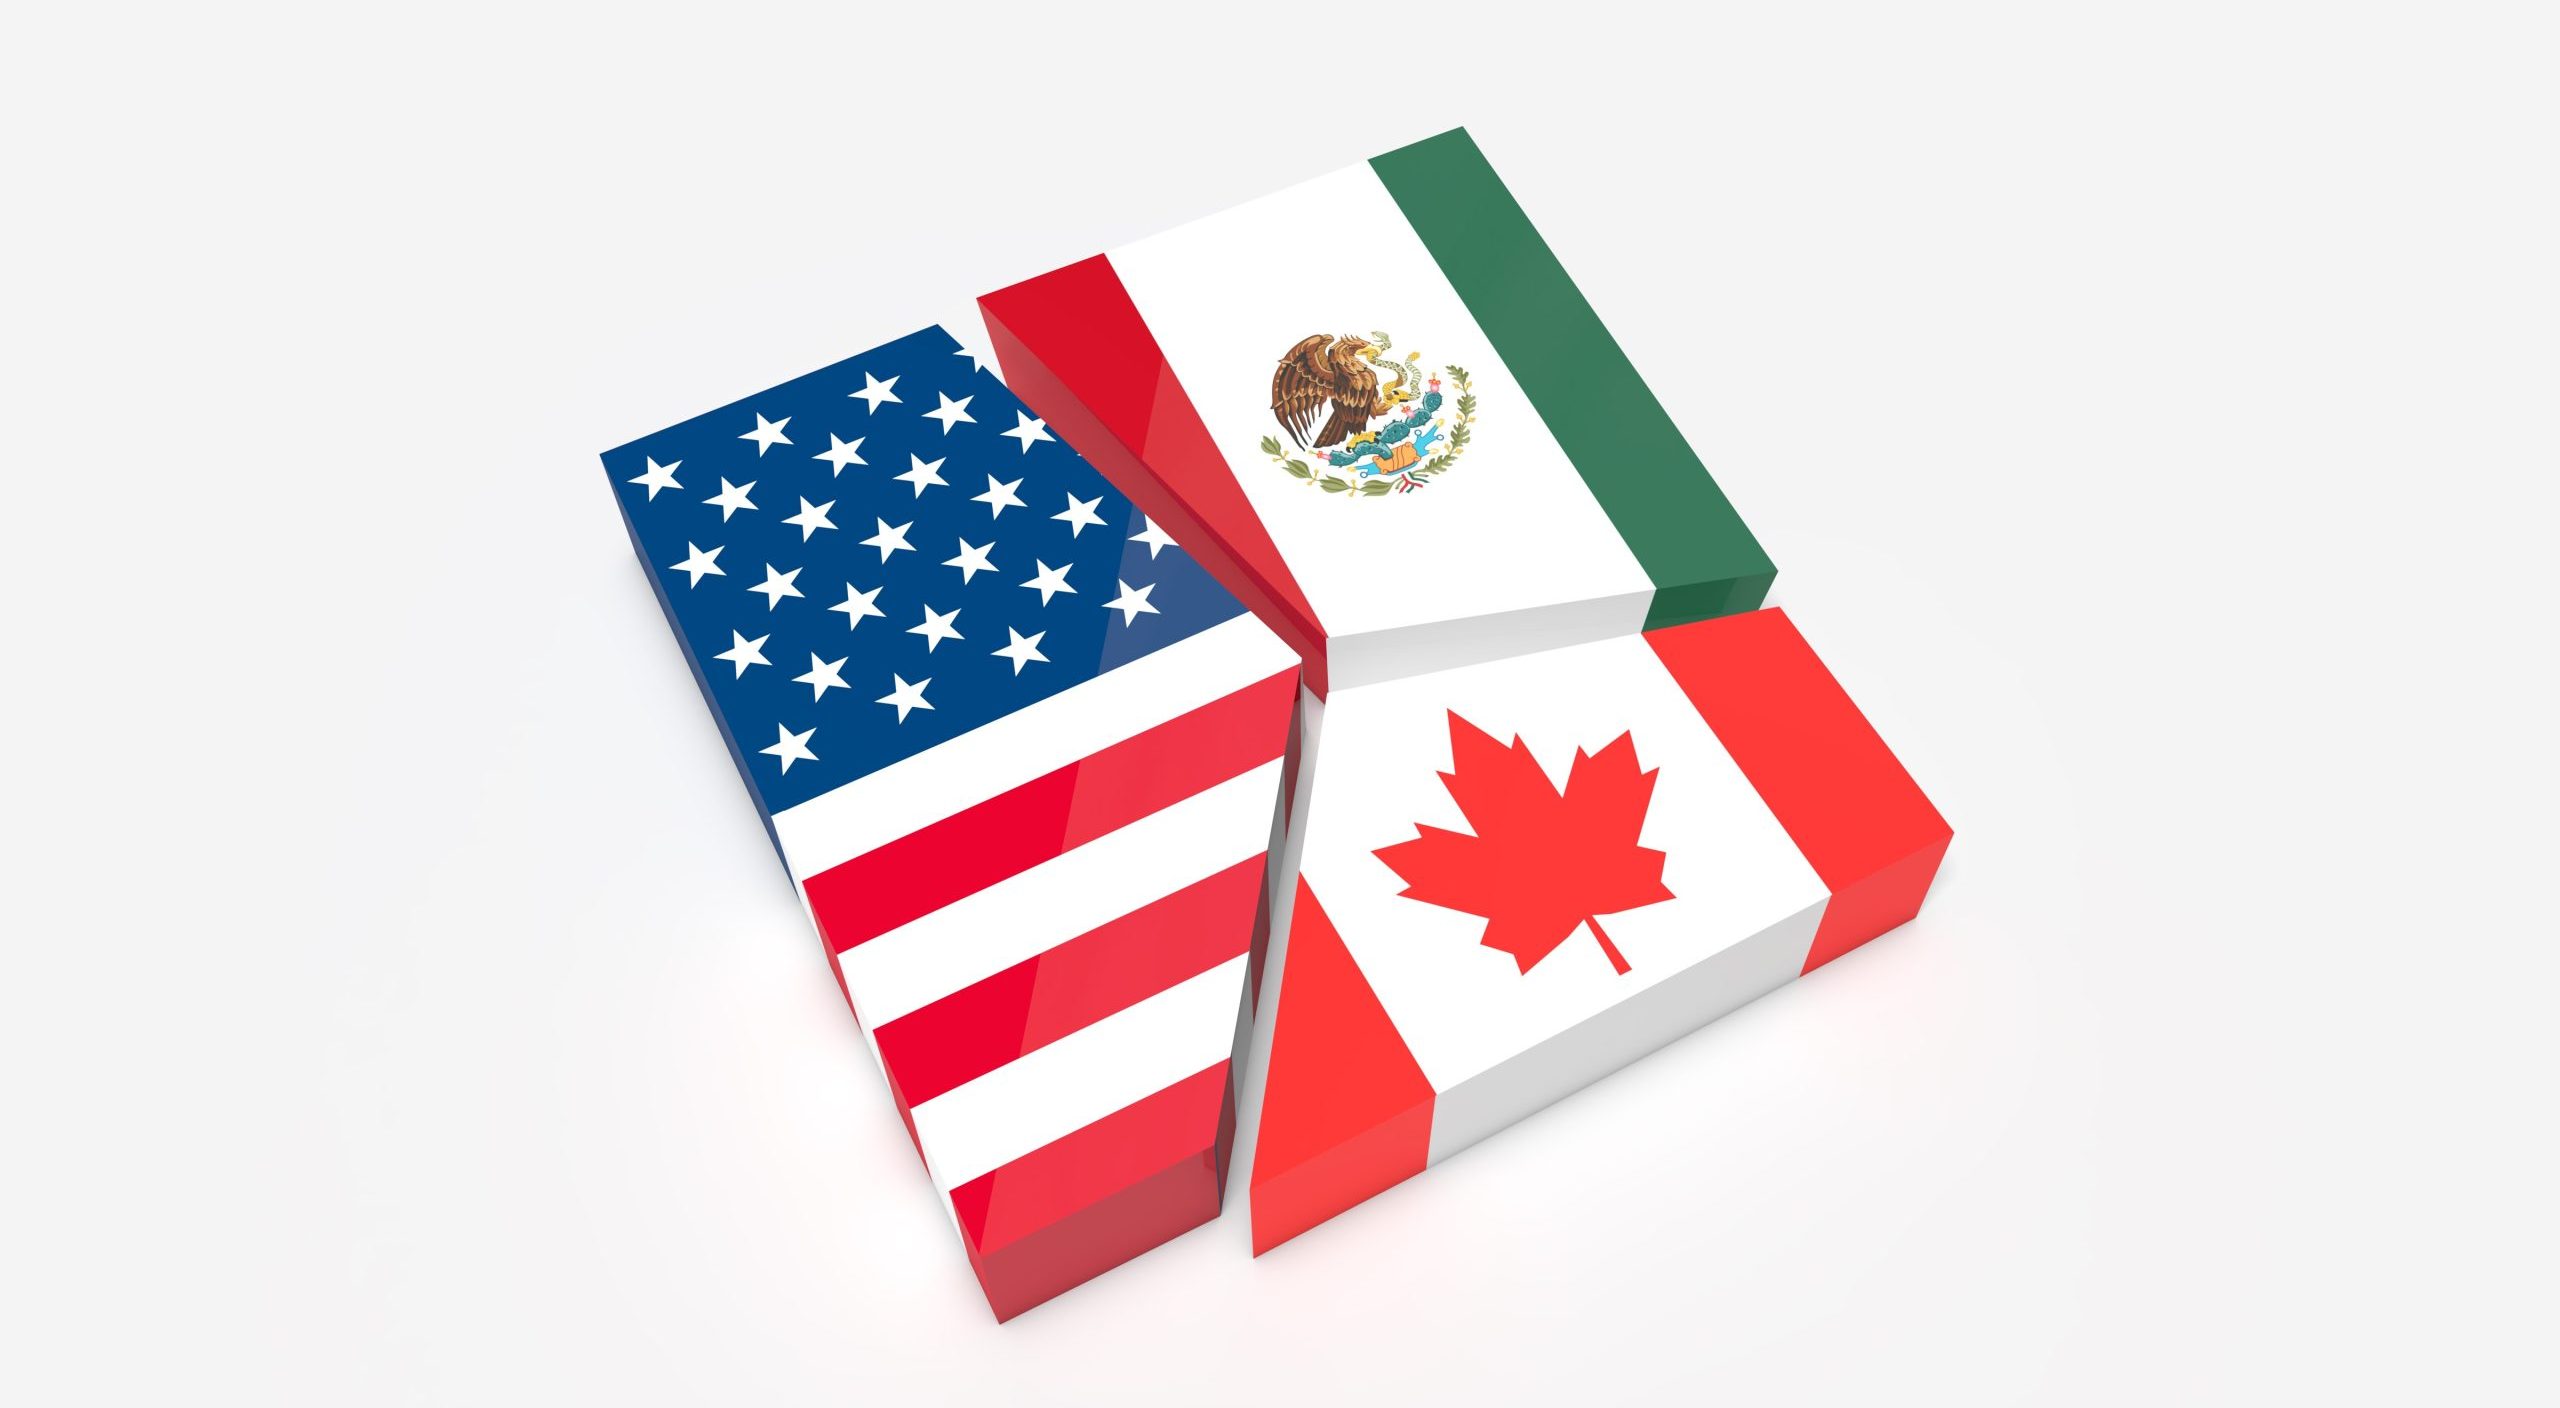 Puzzle pieces of US, Mexico and Canada flags